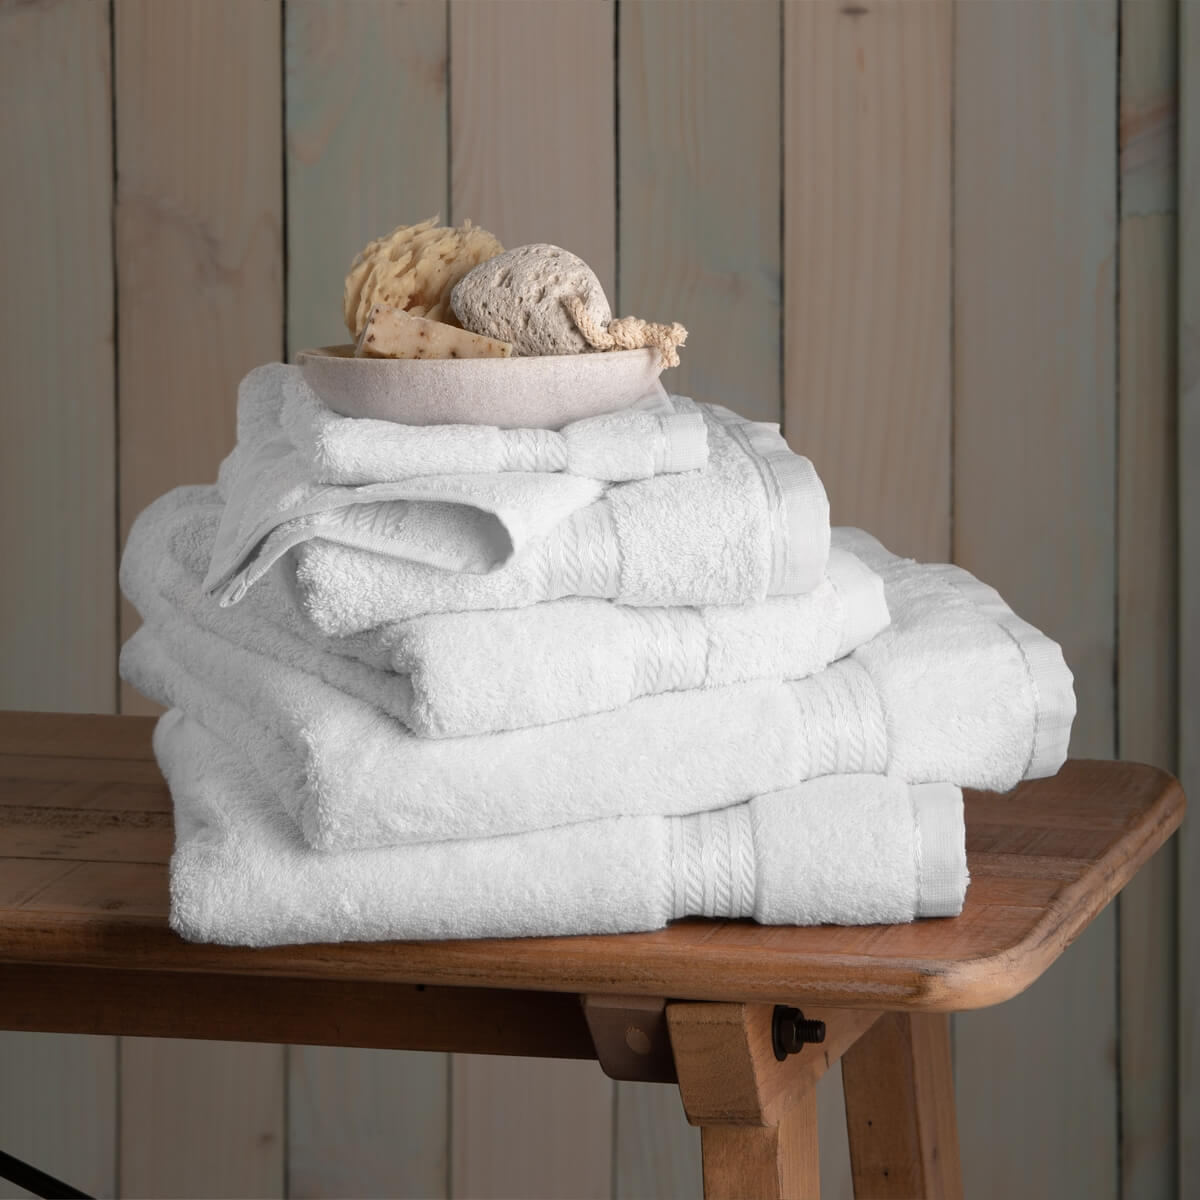 Luxury White Bath Towels for Bathroom-Hotel-Spa-Kitchen-Set - Circlet Egyptian Cotton - Highly